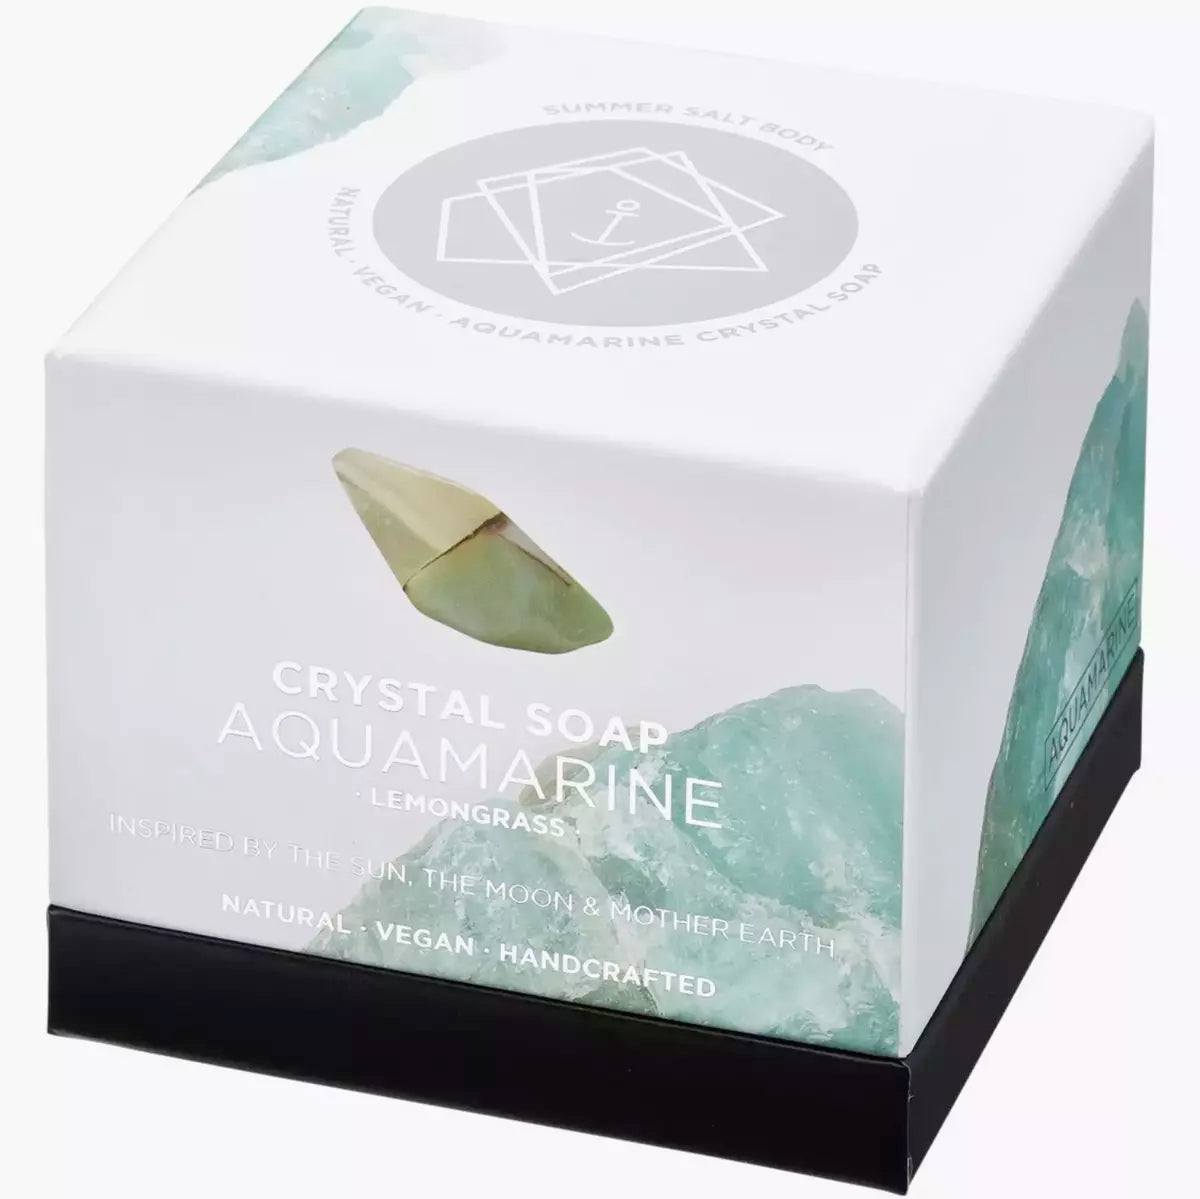 Summer Salt Body's Aquamarine crystal soap is a luxurious product available at johnlewis.com.